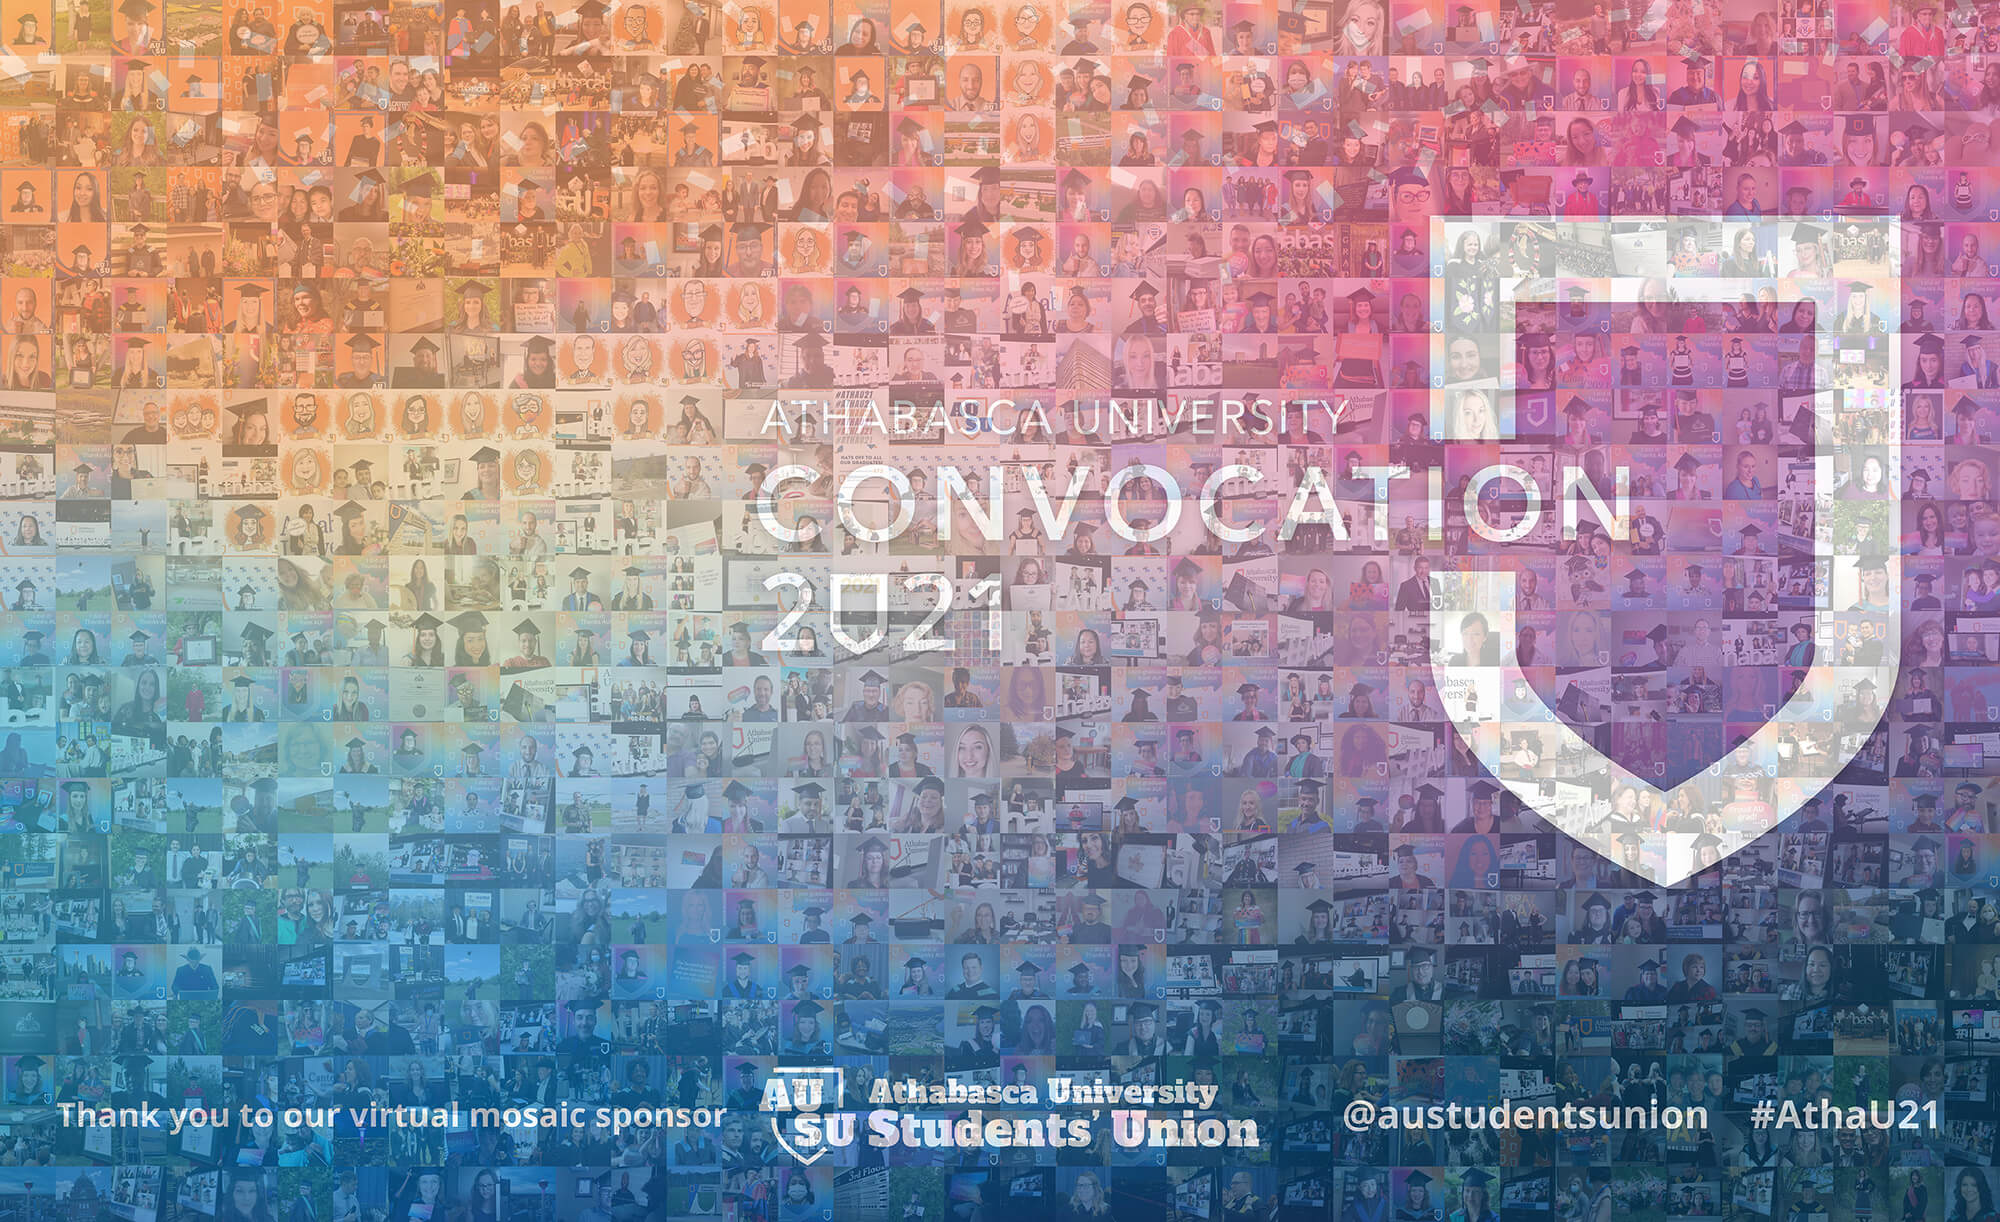 Mosaic image of AU Convocation 2021 made up of smaller pictures of AU's 2021 graduates